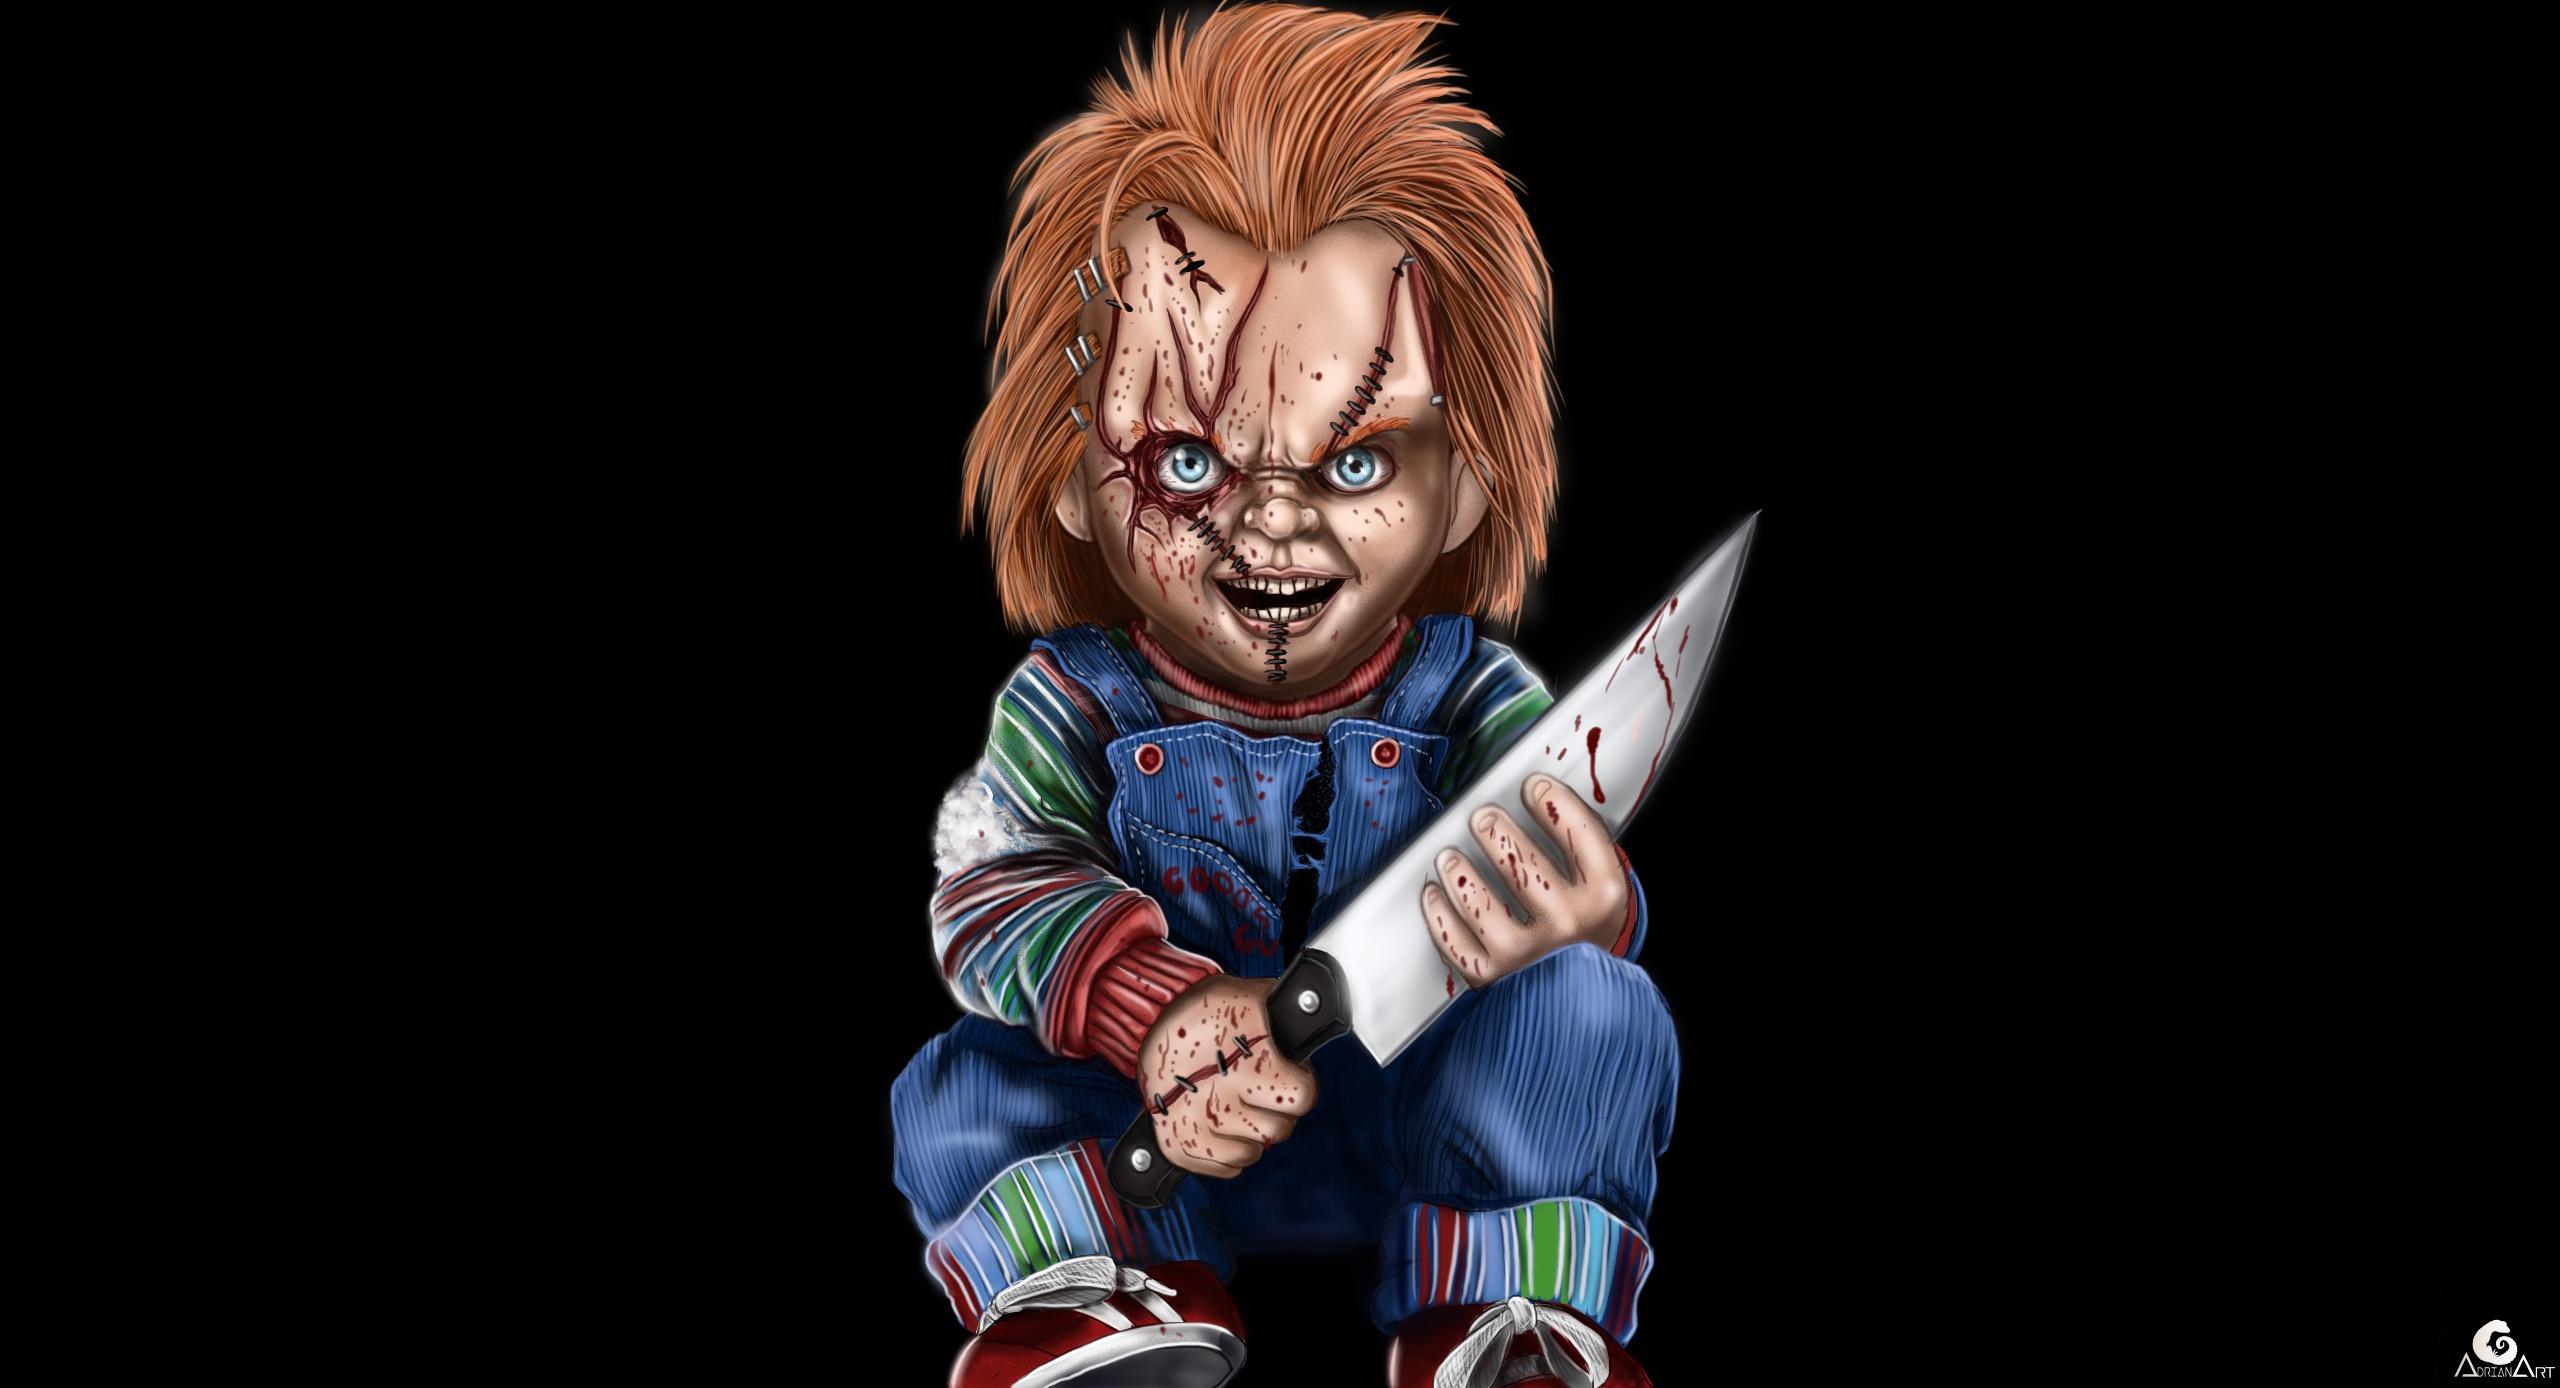 HD wallpaper, Movie Characters, Chucky, Puppets, Knife, Horror